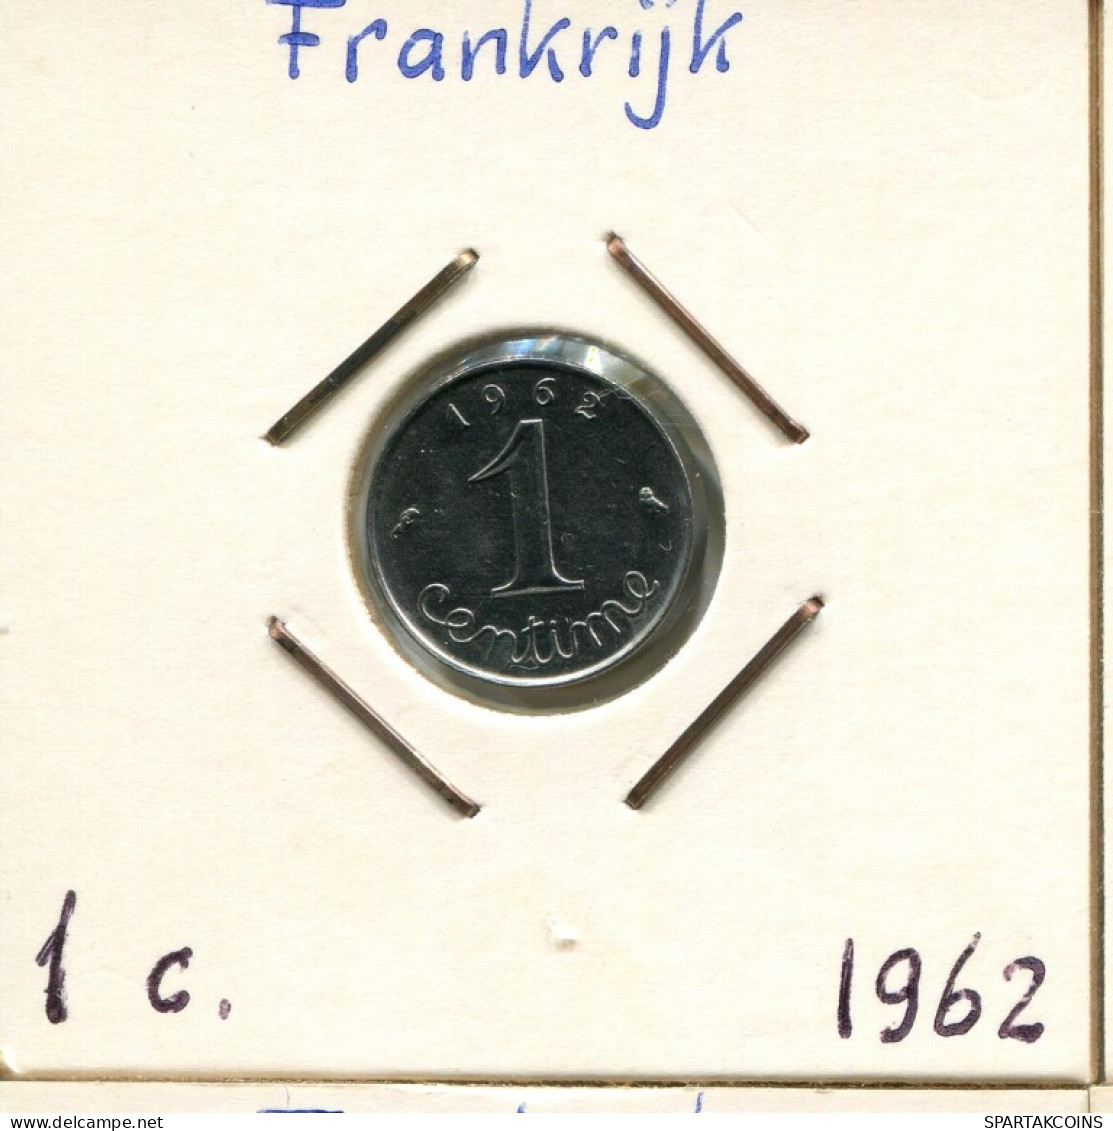 1 CENTIME 1962 FRANCE Coin French Coin #AK966.U.A - 1 Centime